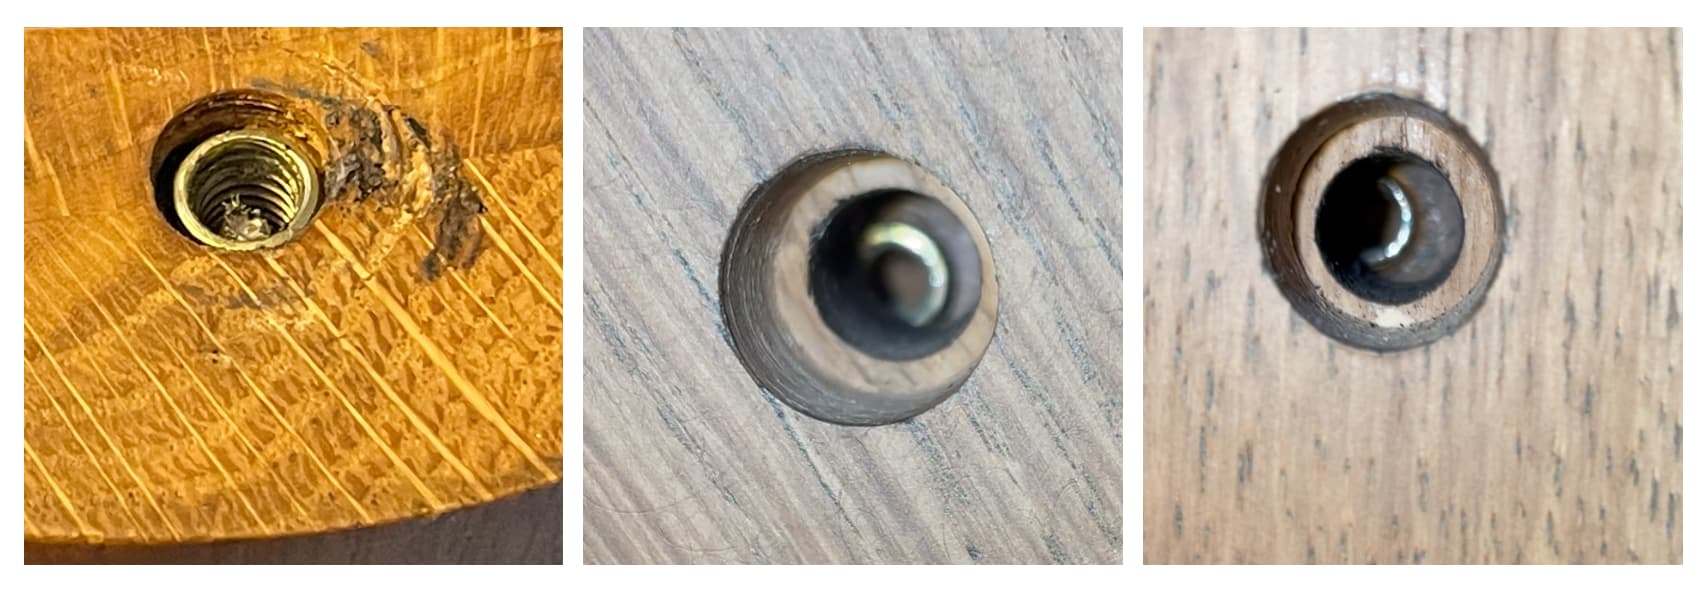 First image shows bit broken in fixing, second two images show clearly misaligned holes by 50%